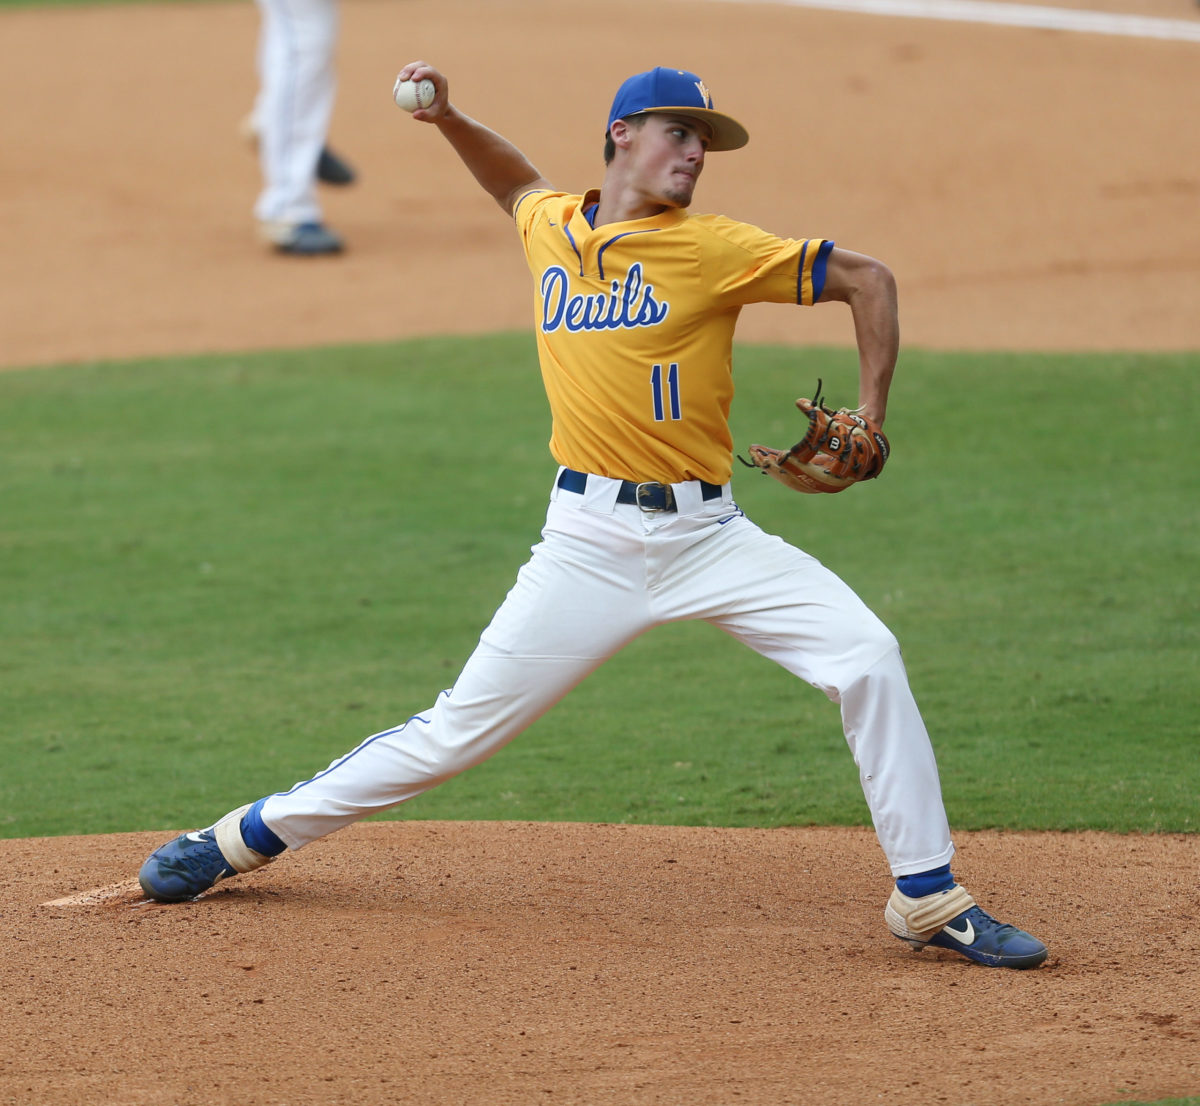 Booneville's Hayden Donahue (11) releases a pitch in the first inning. Booneville and Magee played in game 1 of the MHSAA Class 3A Baseball Championship on Tuesday, June 1, 2021 at Trustmark Park. Photo by Keith Warren